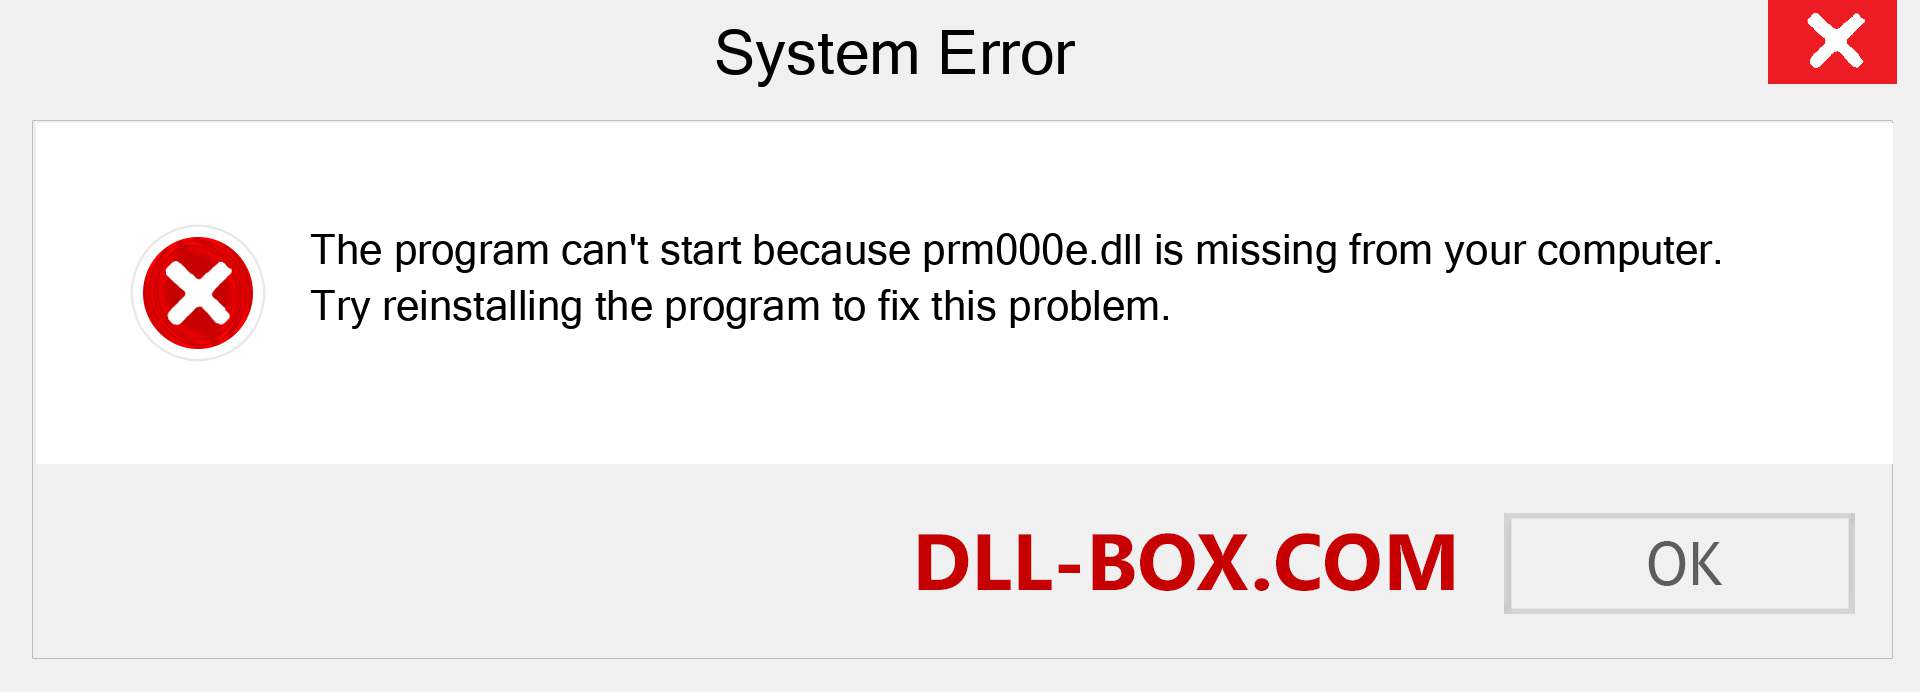  prm000e.dll file is missing?. Download for Windows 7, 8, 10 - Fix  prm000e dll Missing Error on Windows, photos, images